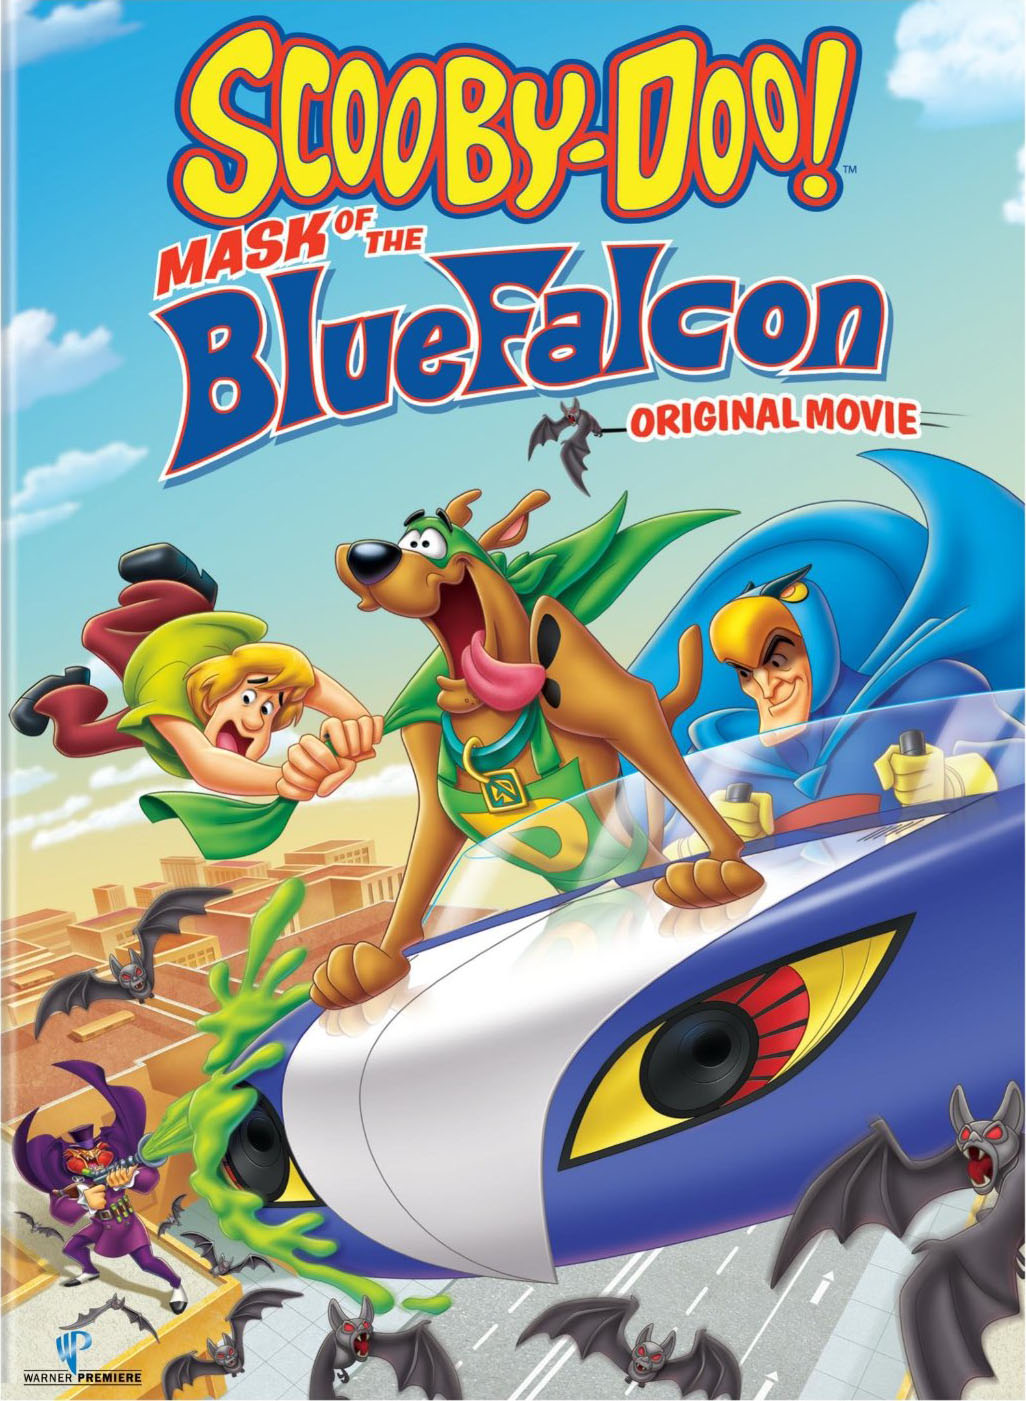 http://static4.wikia.nocookie.net/__cb20121215182955/scoobydoo/images/5/5c/Scooby-Doo!_Mask_of_the_Blue_Falcon_DVD.jpg